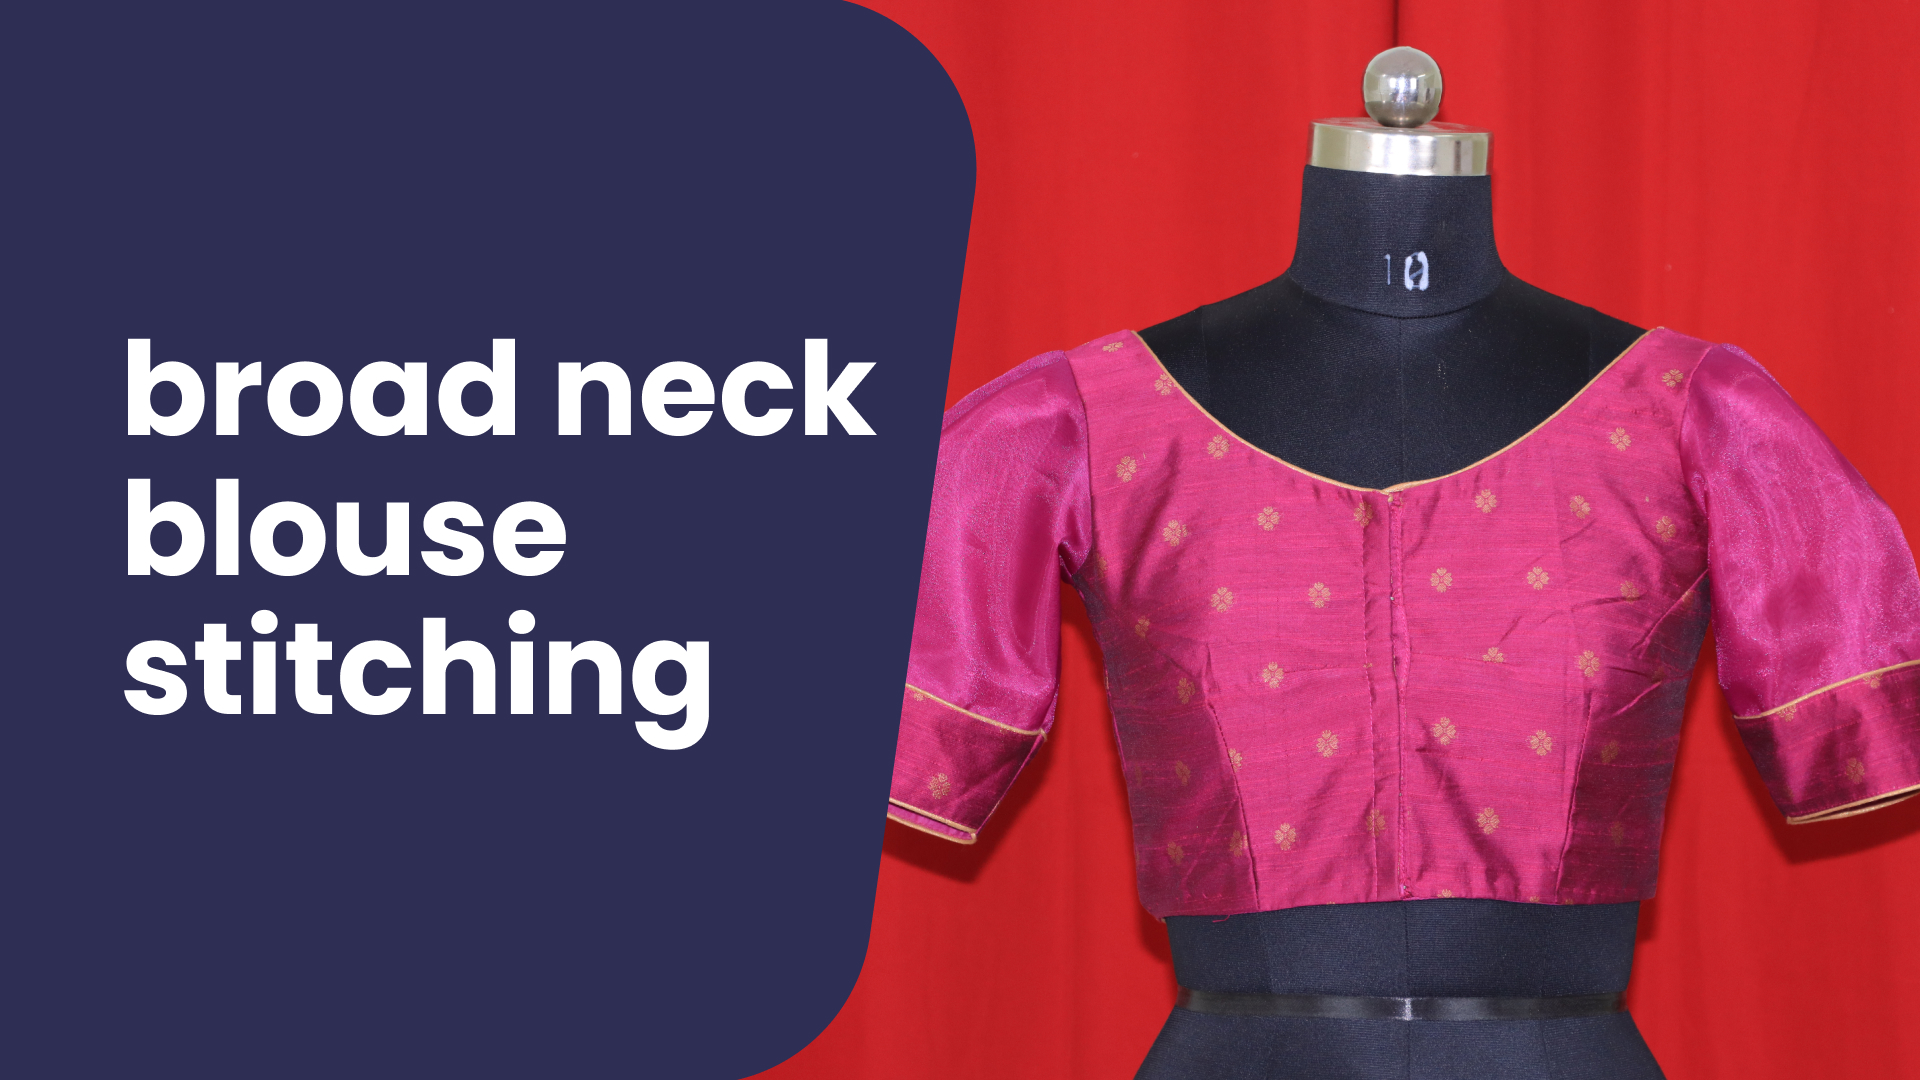 Course Trailer: How to Stitch a Broad Neck Blouse?. Watch to know more.